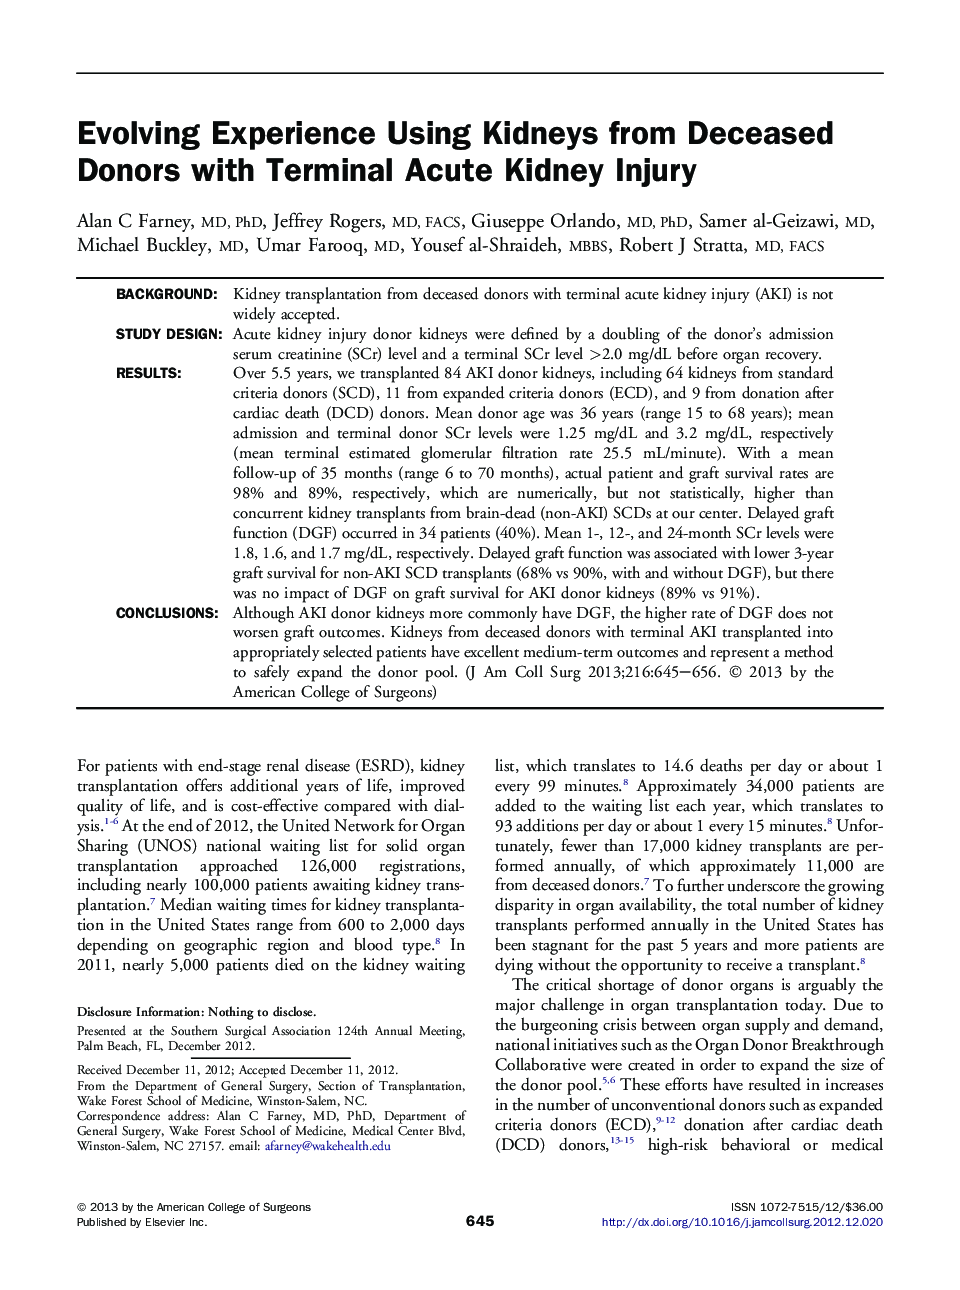 Evolving Experience Using Kidneys from Deceased Donors with Terminal Acute Kidney Injury 